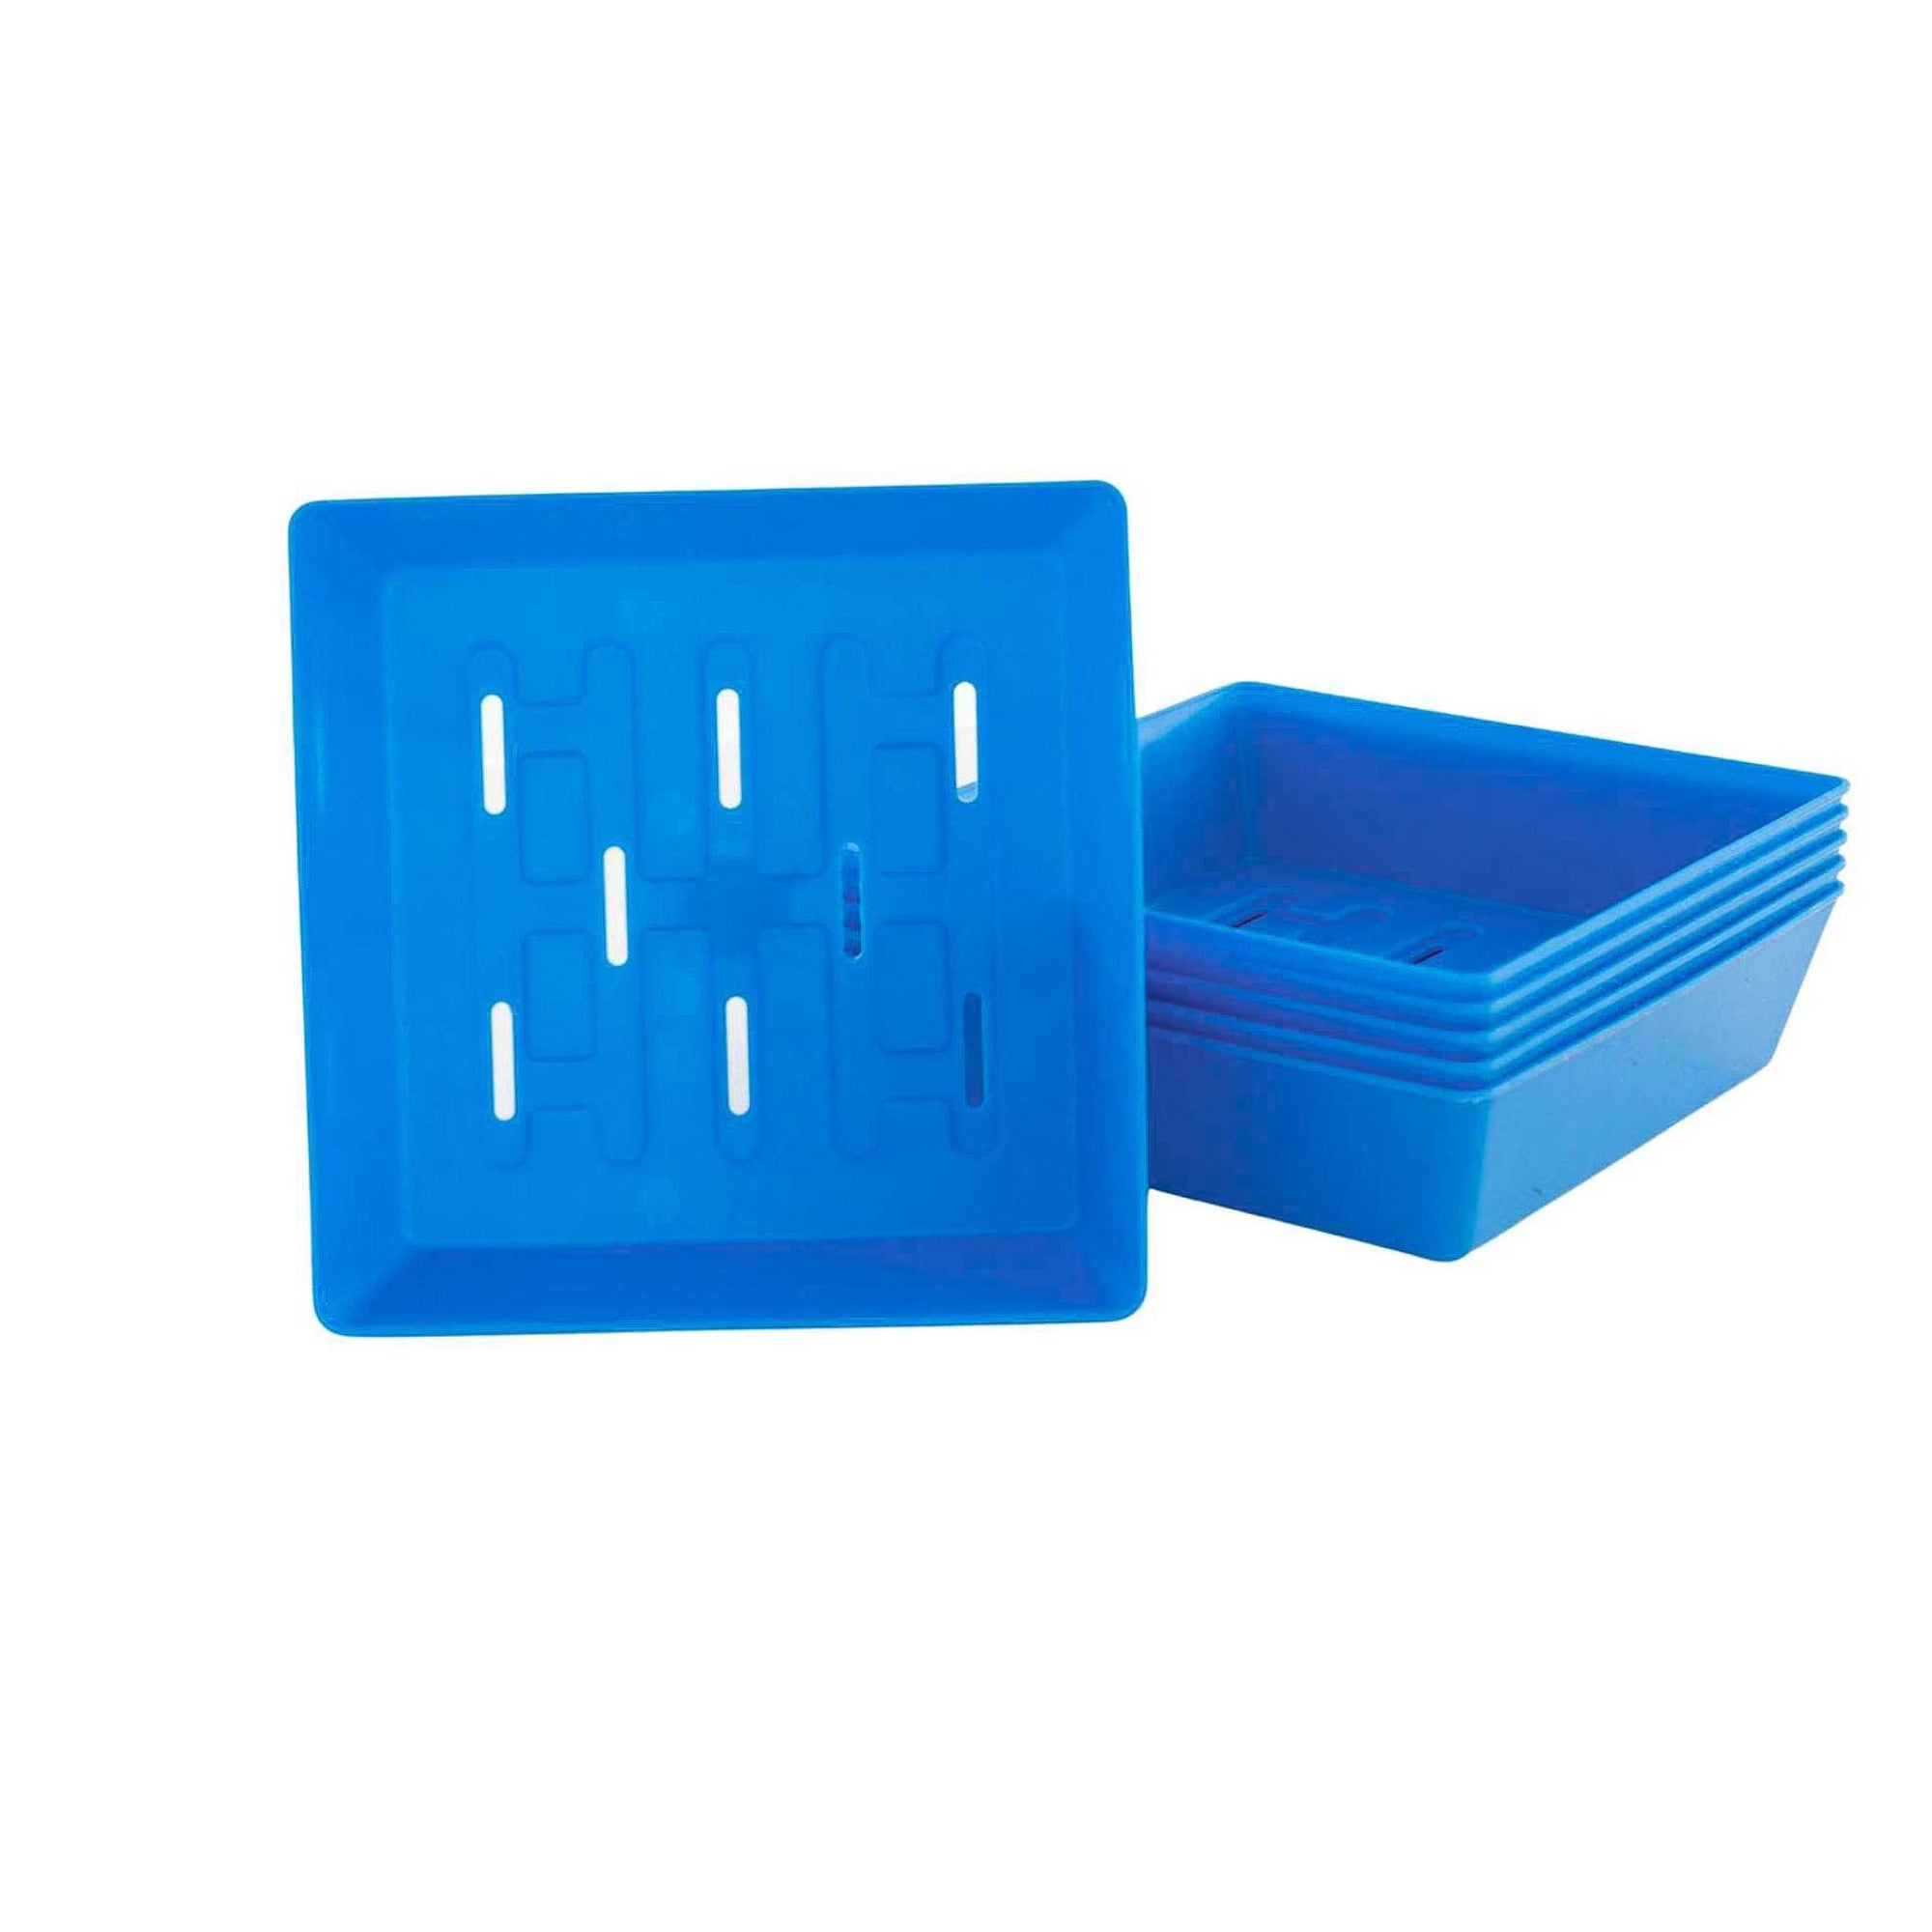 Blue Shallow 5x5 With Holes